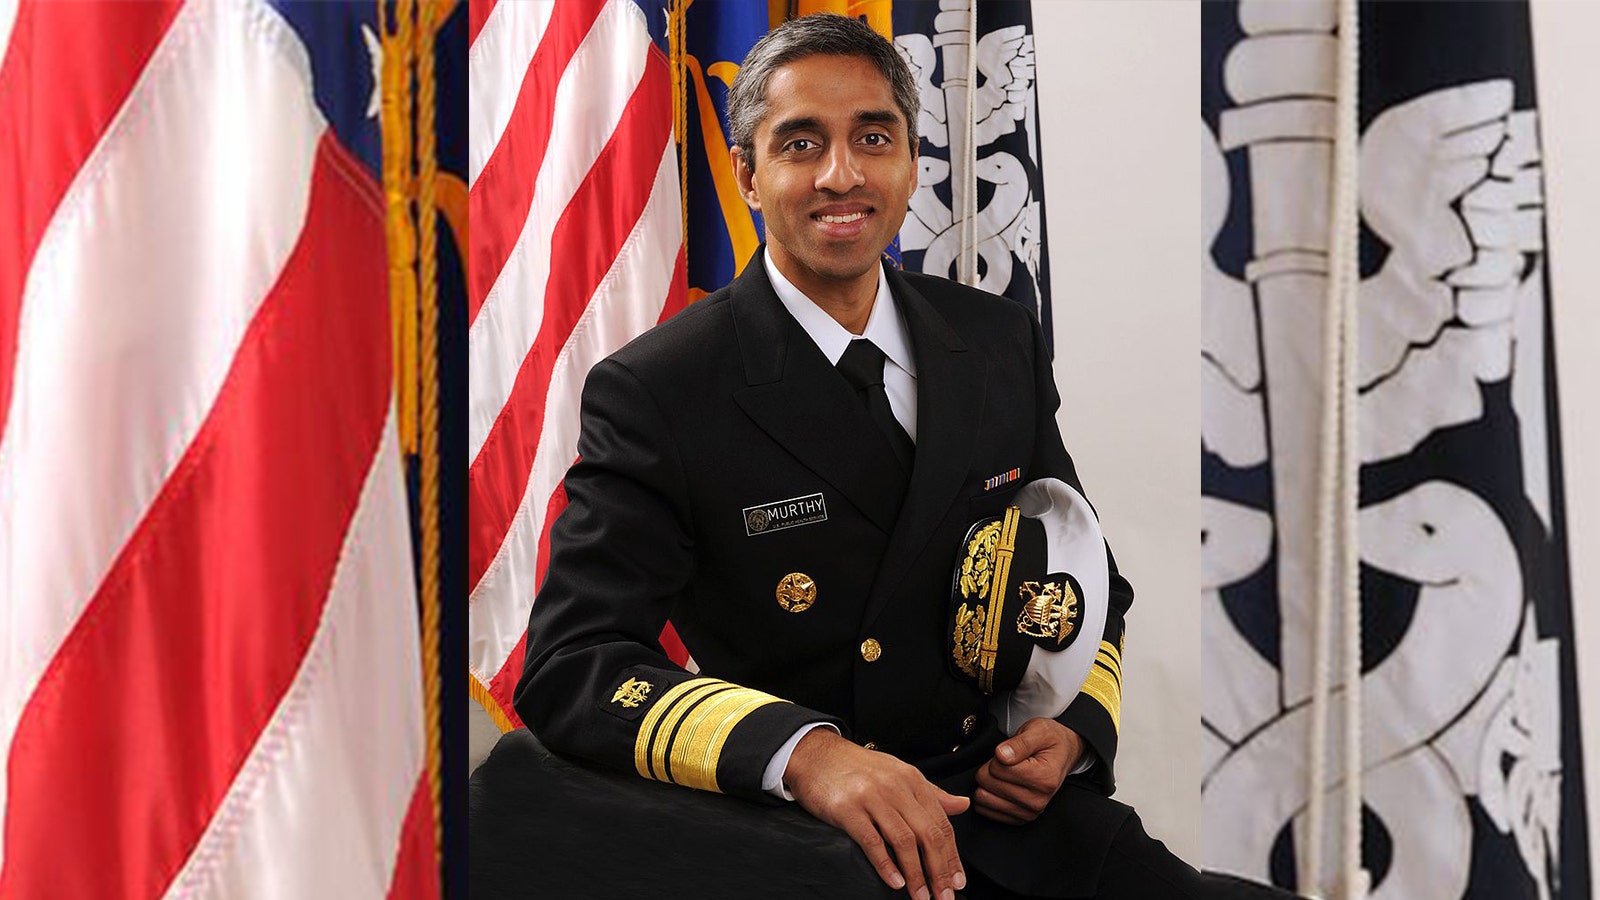 U.S. Surgeon General Vivek Murthy: There Is 'No Value' To Incarcerating People For Cannabis Use